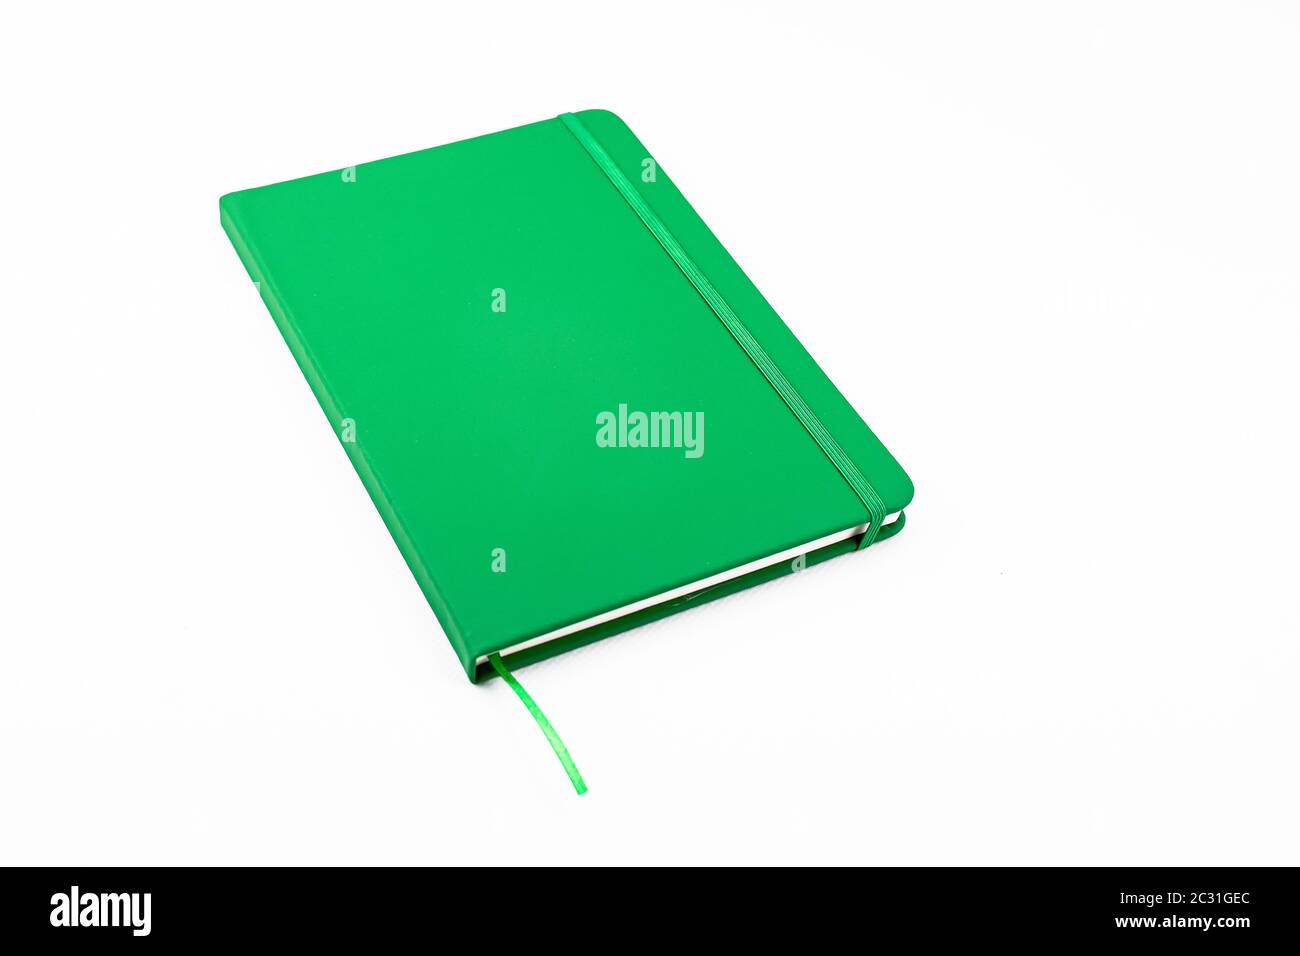 Closed green leather diary with trim and separator to make a mockup as a merchandising product Stock Photo